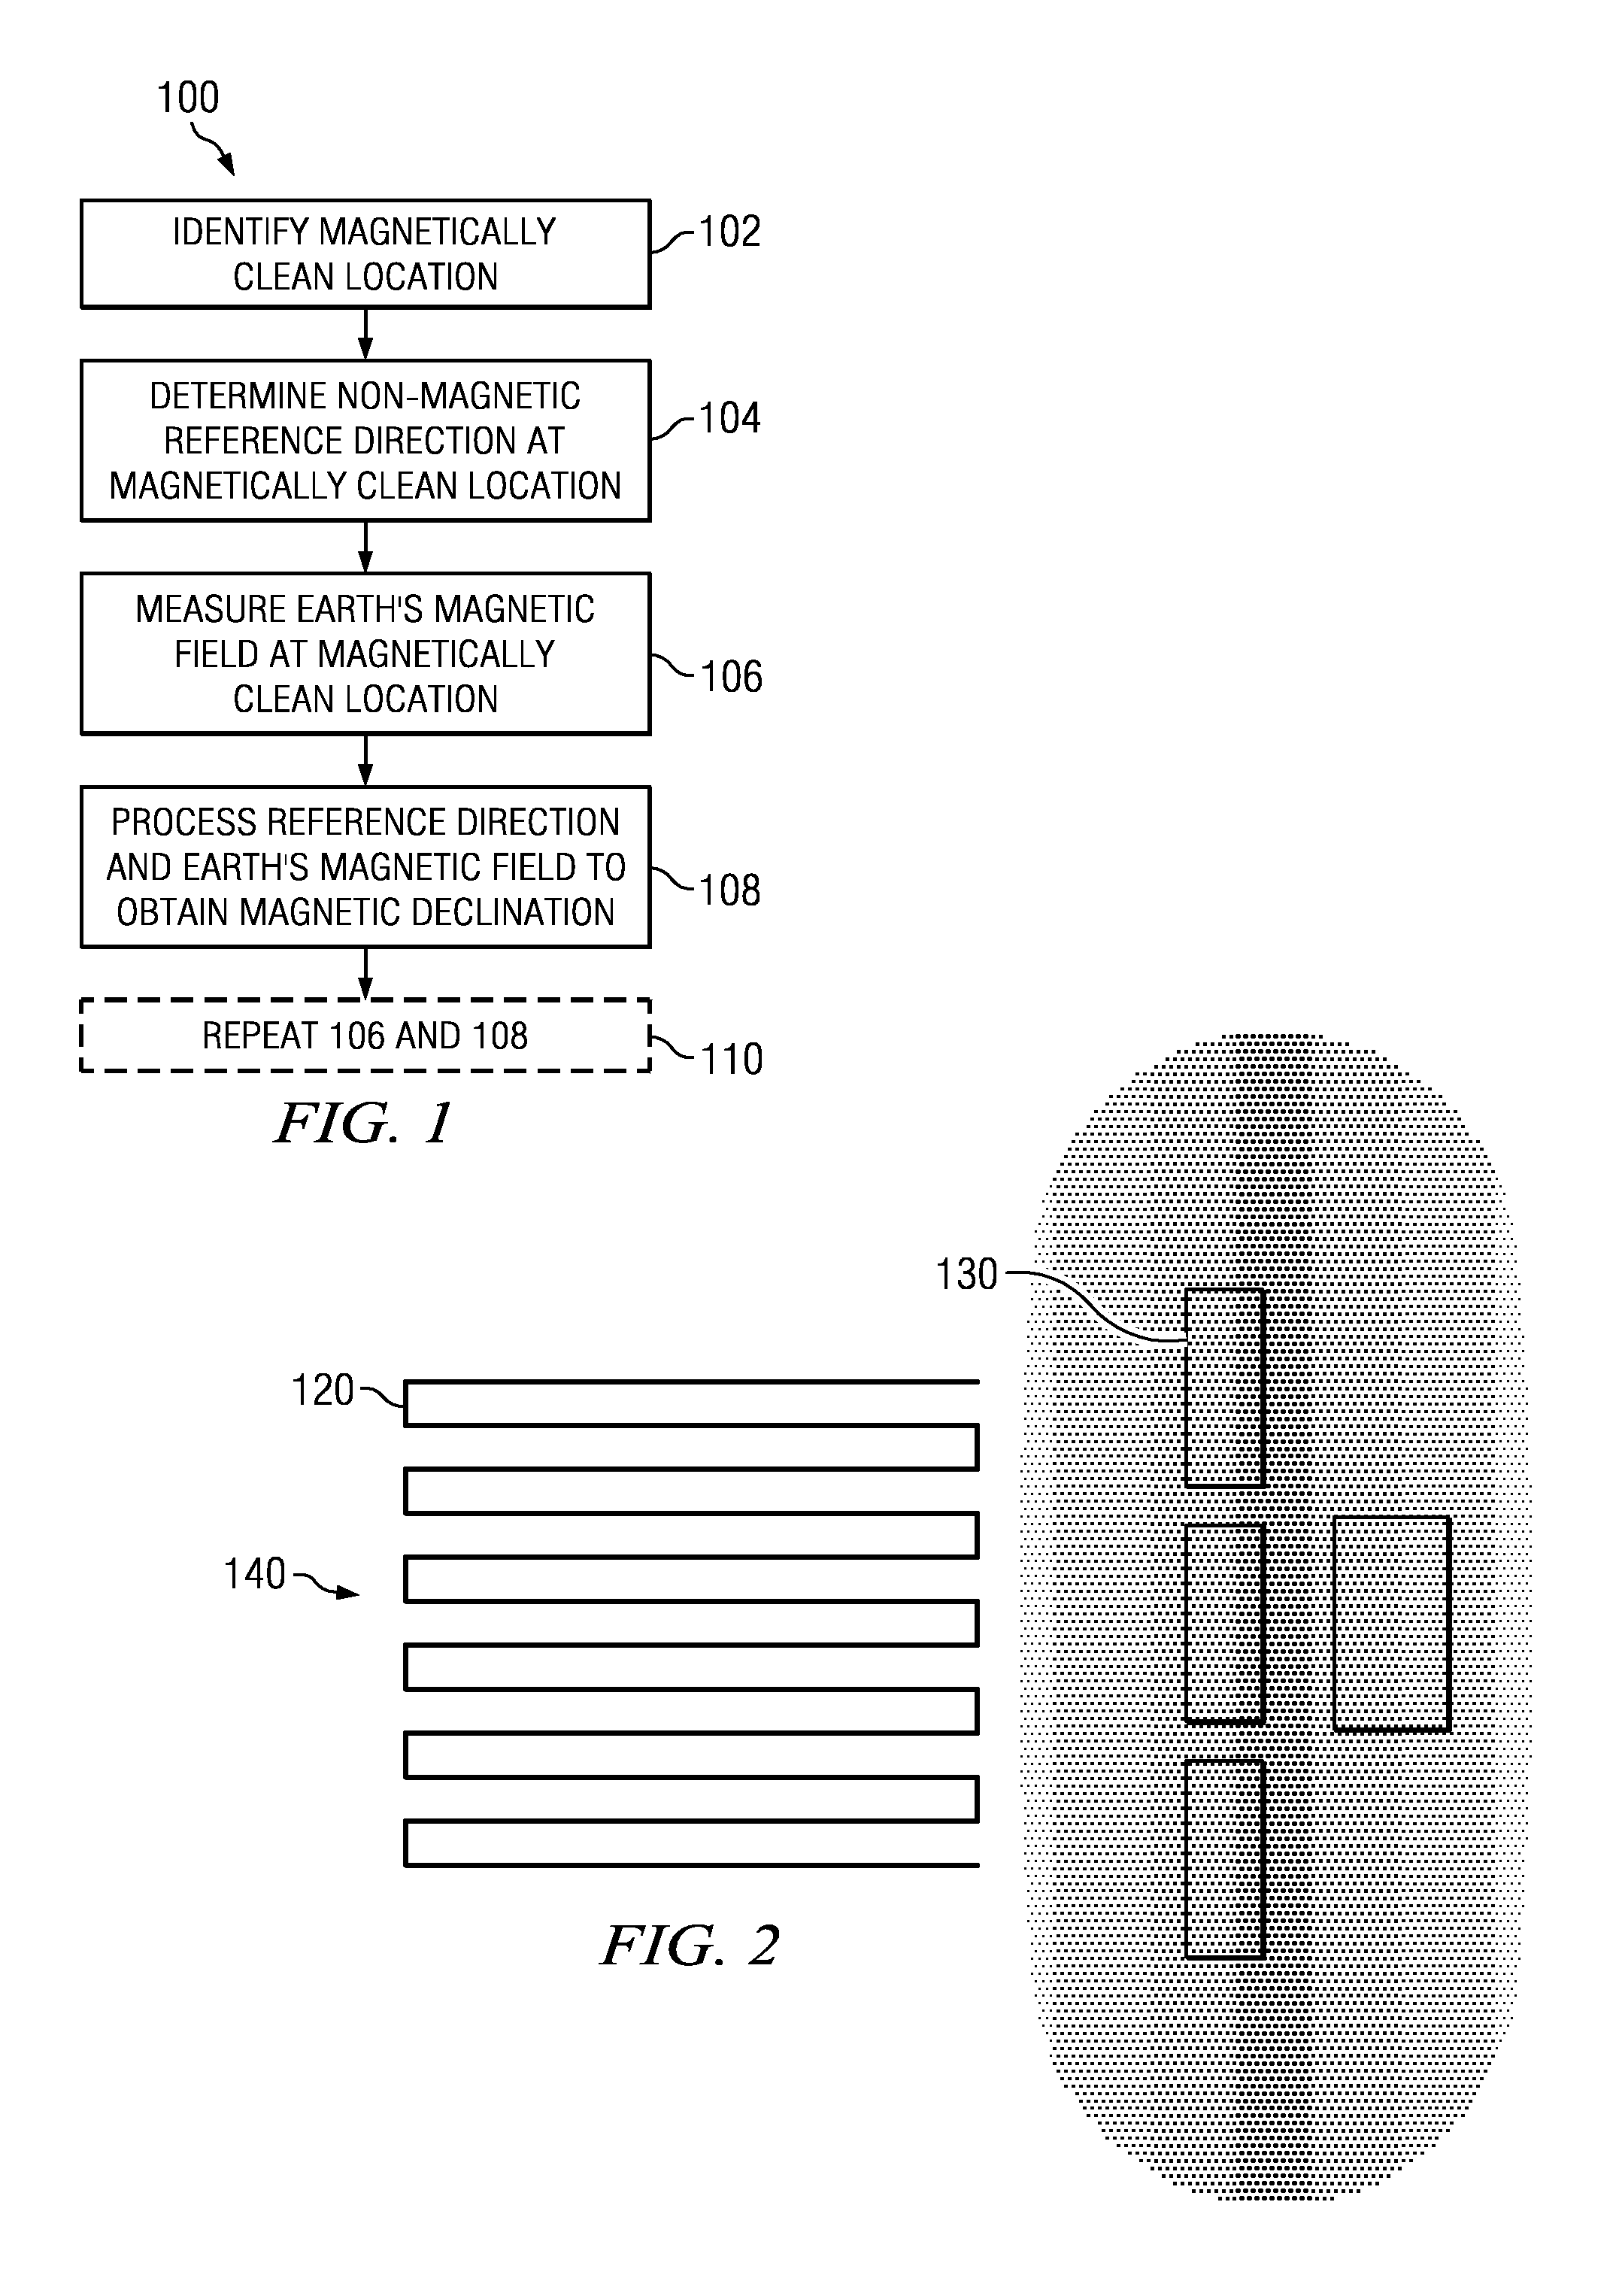 Method for improving wellbore survey accuracy and placement